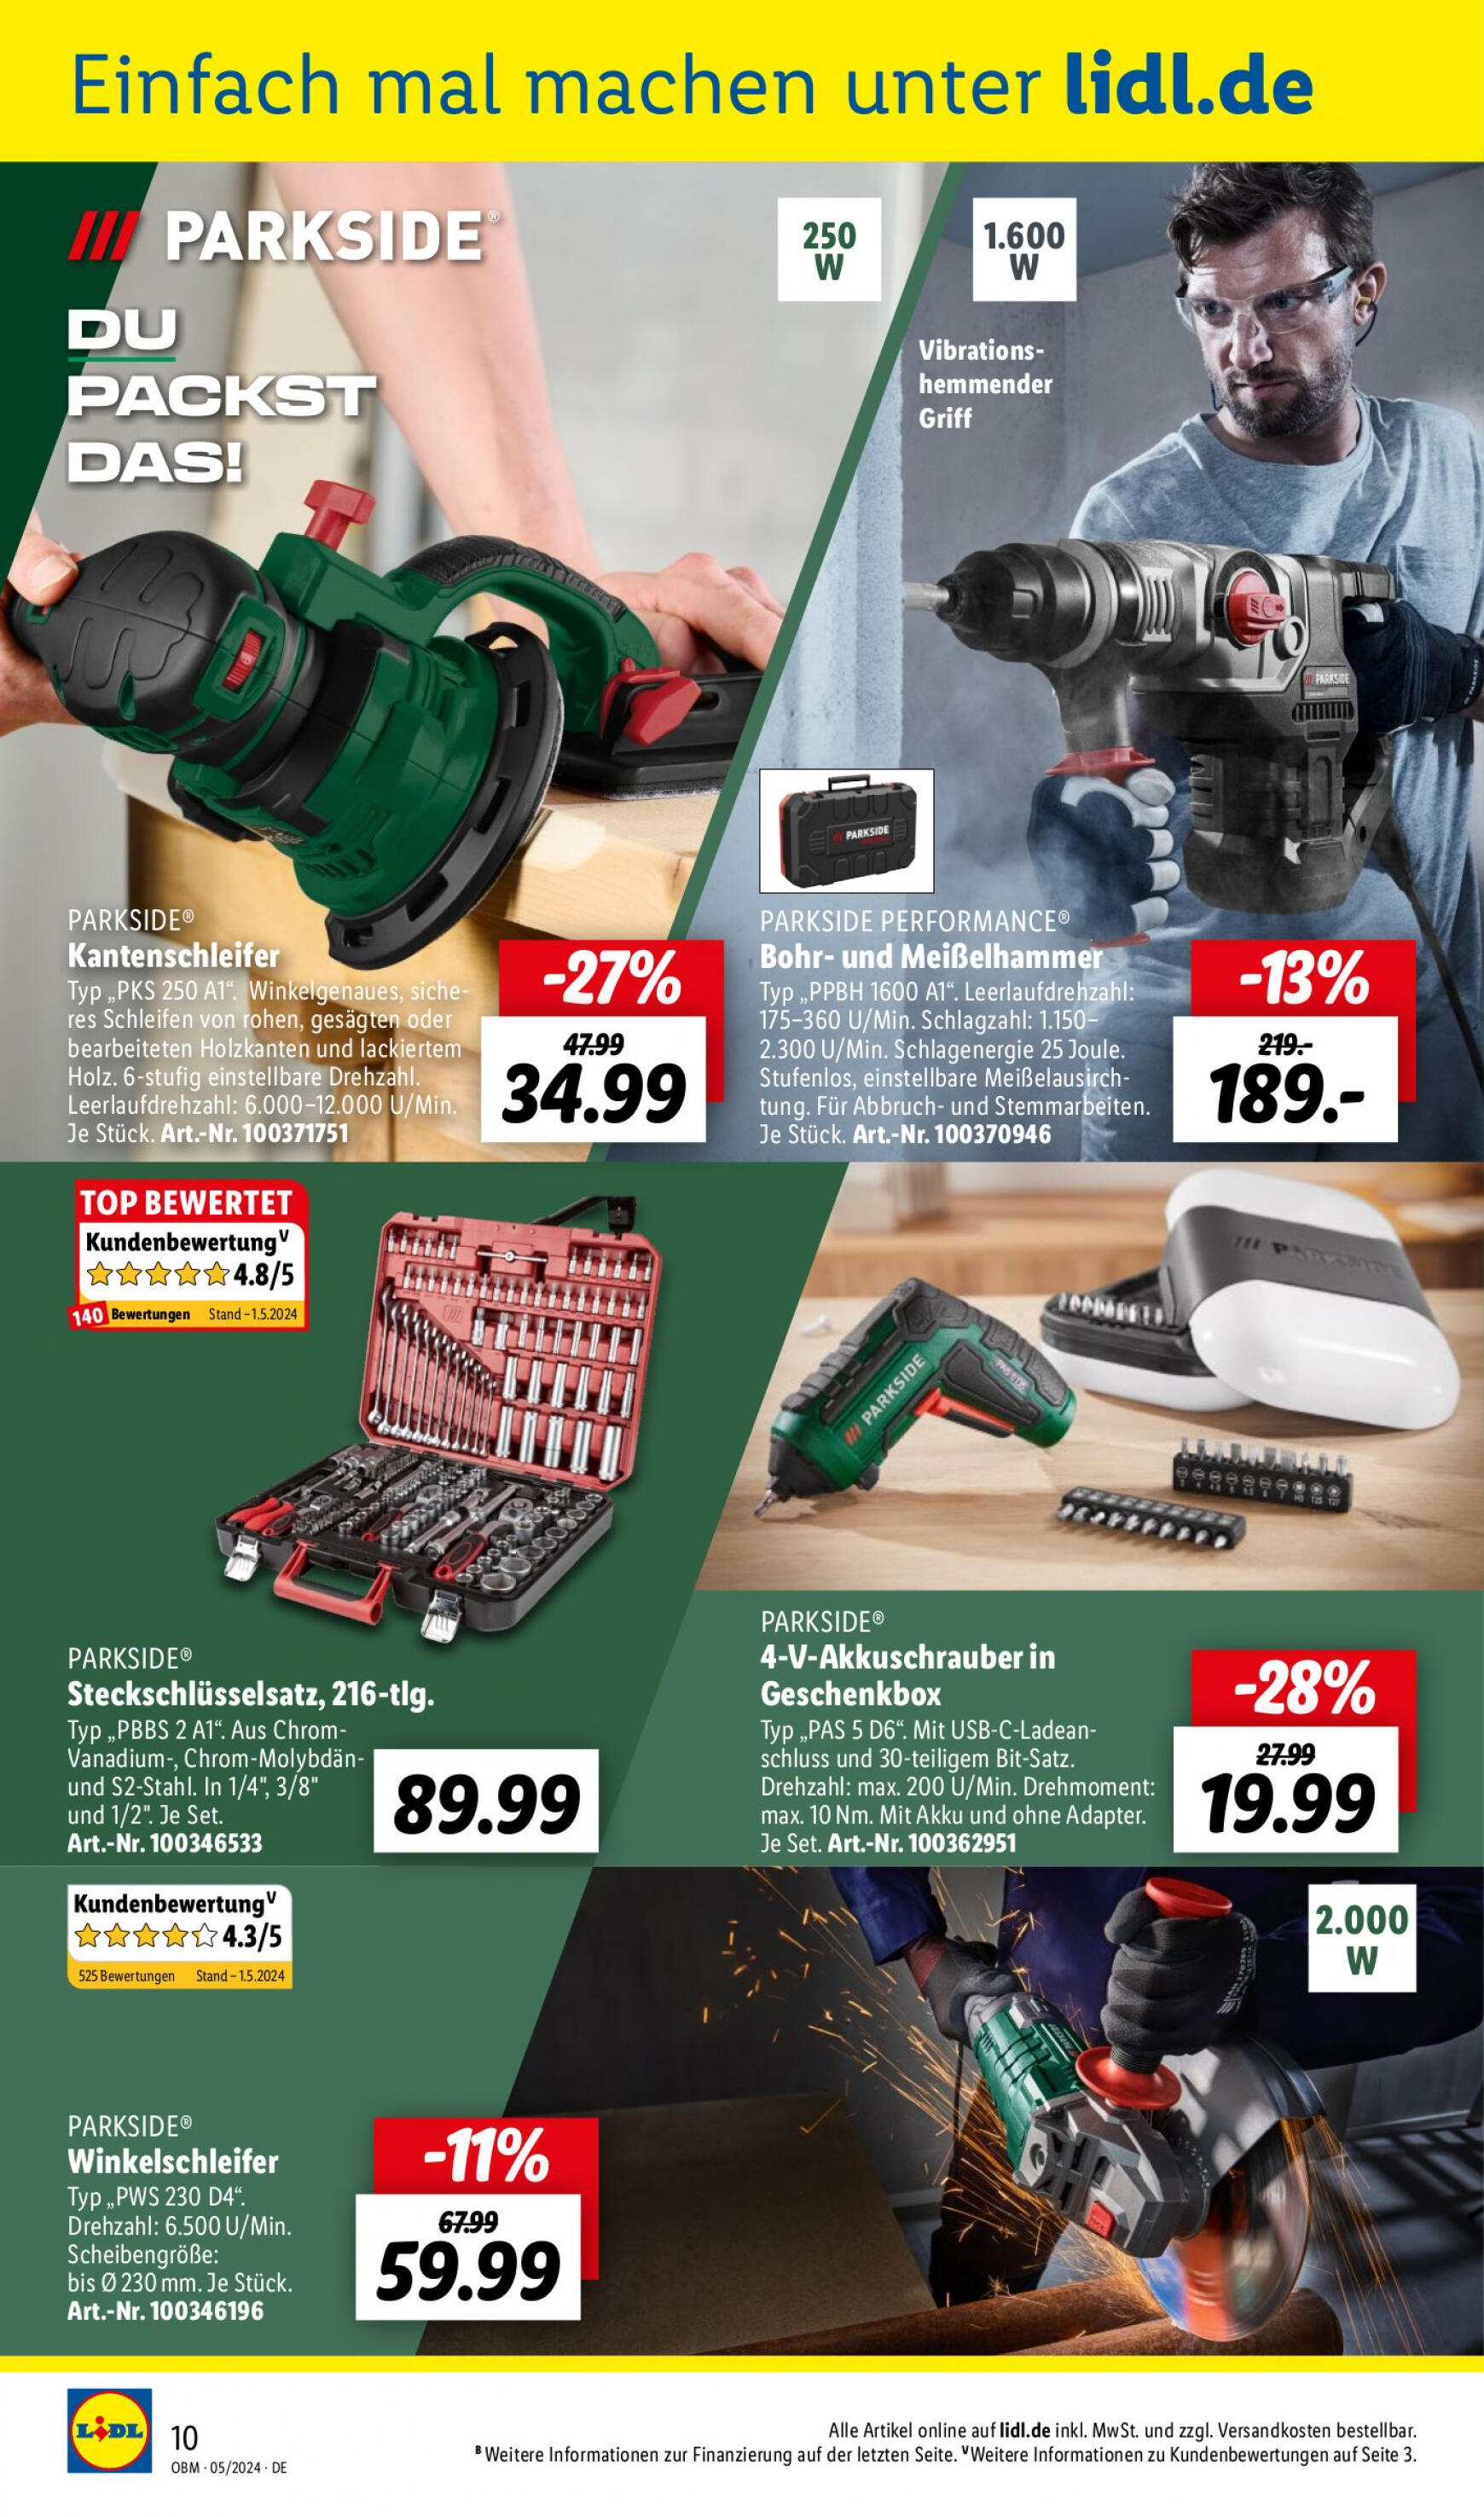 lidl - Flyer Lidl - Aktuelle Onlineshop-Highlights aktuell 01.05. - 31.05. - page: 10